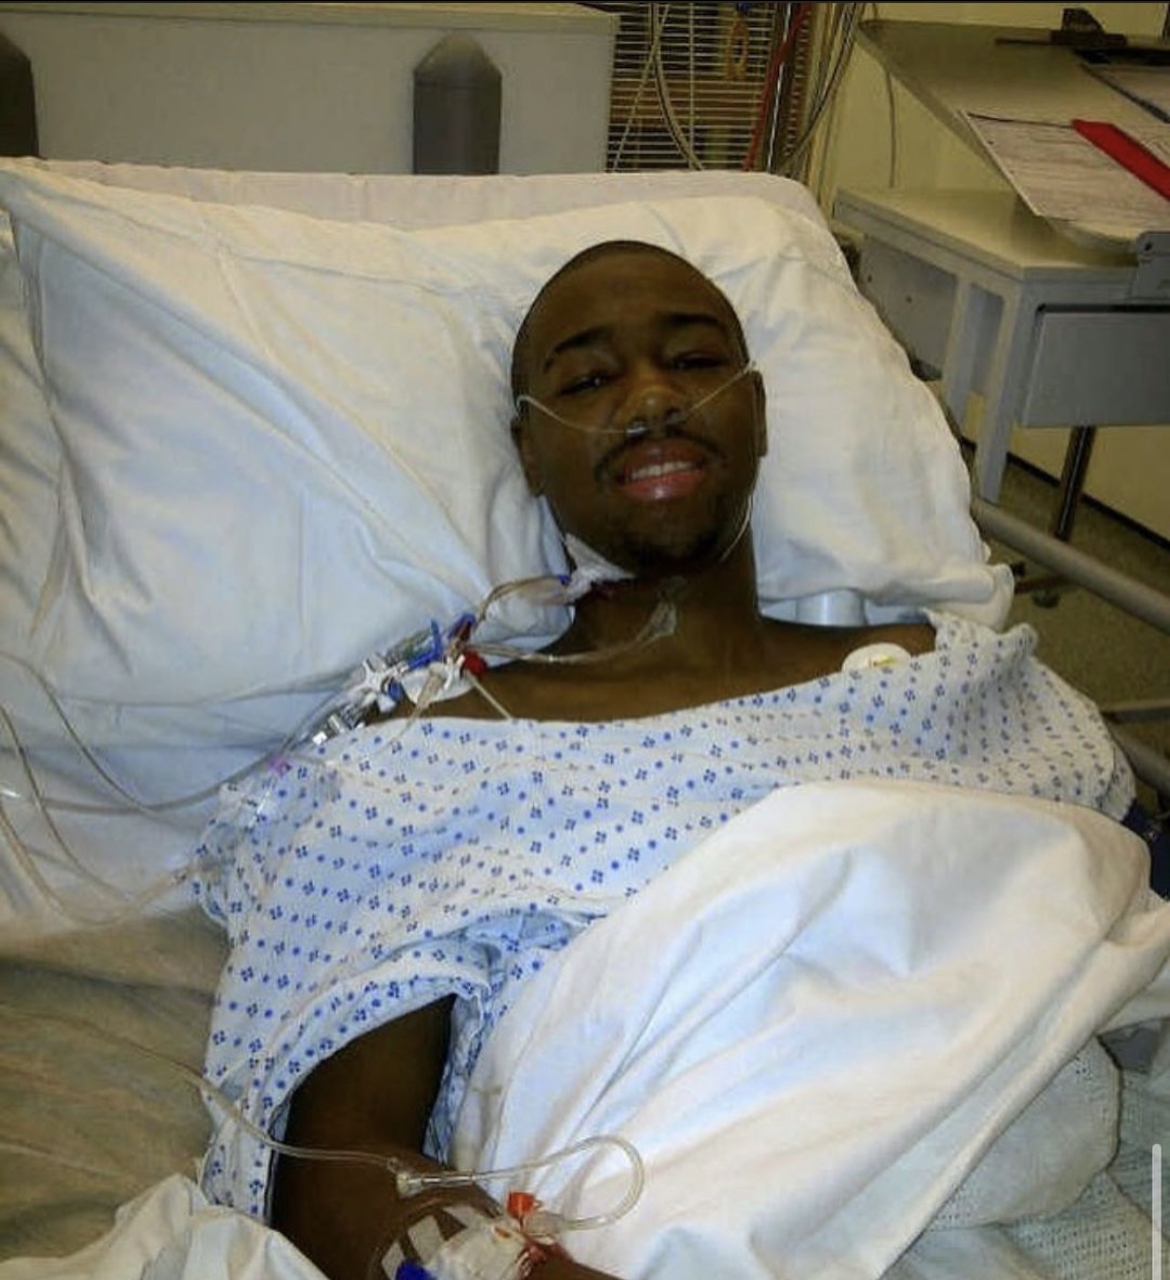 Khiry after his kidney transplant